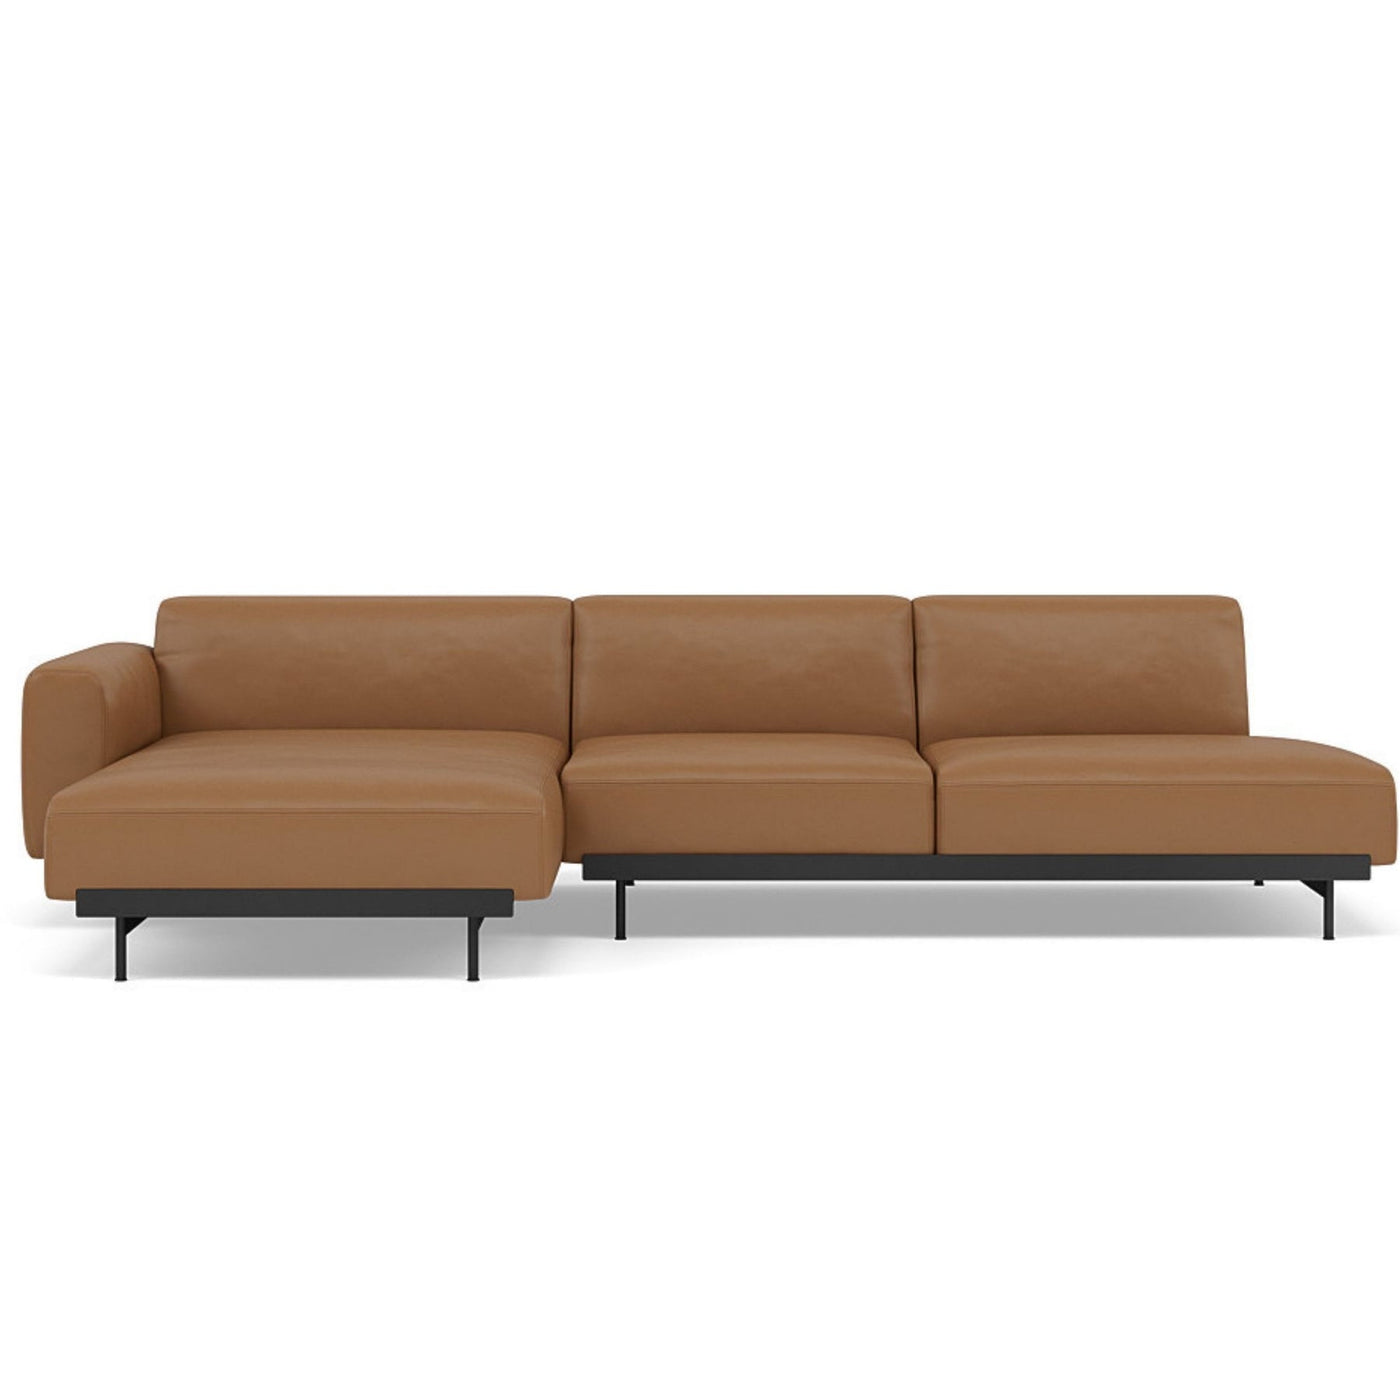 Muuto In Situ Modular 3 Seater Sofa, configuration 9. Made to order from someday designs. #colour_cognac-refine-leather